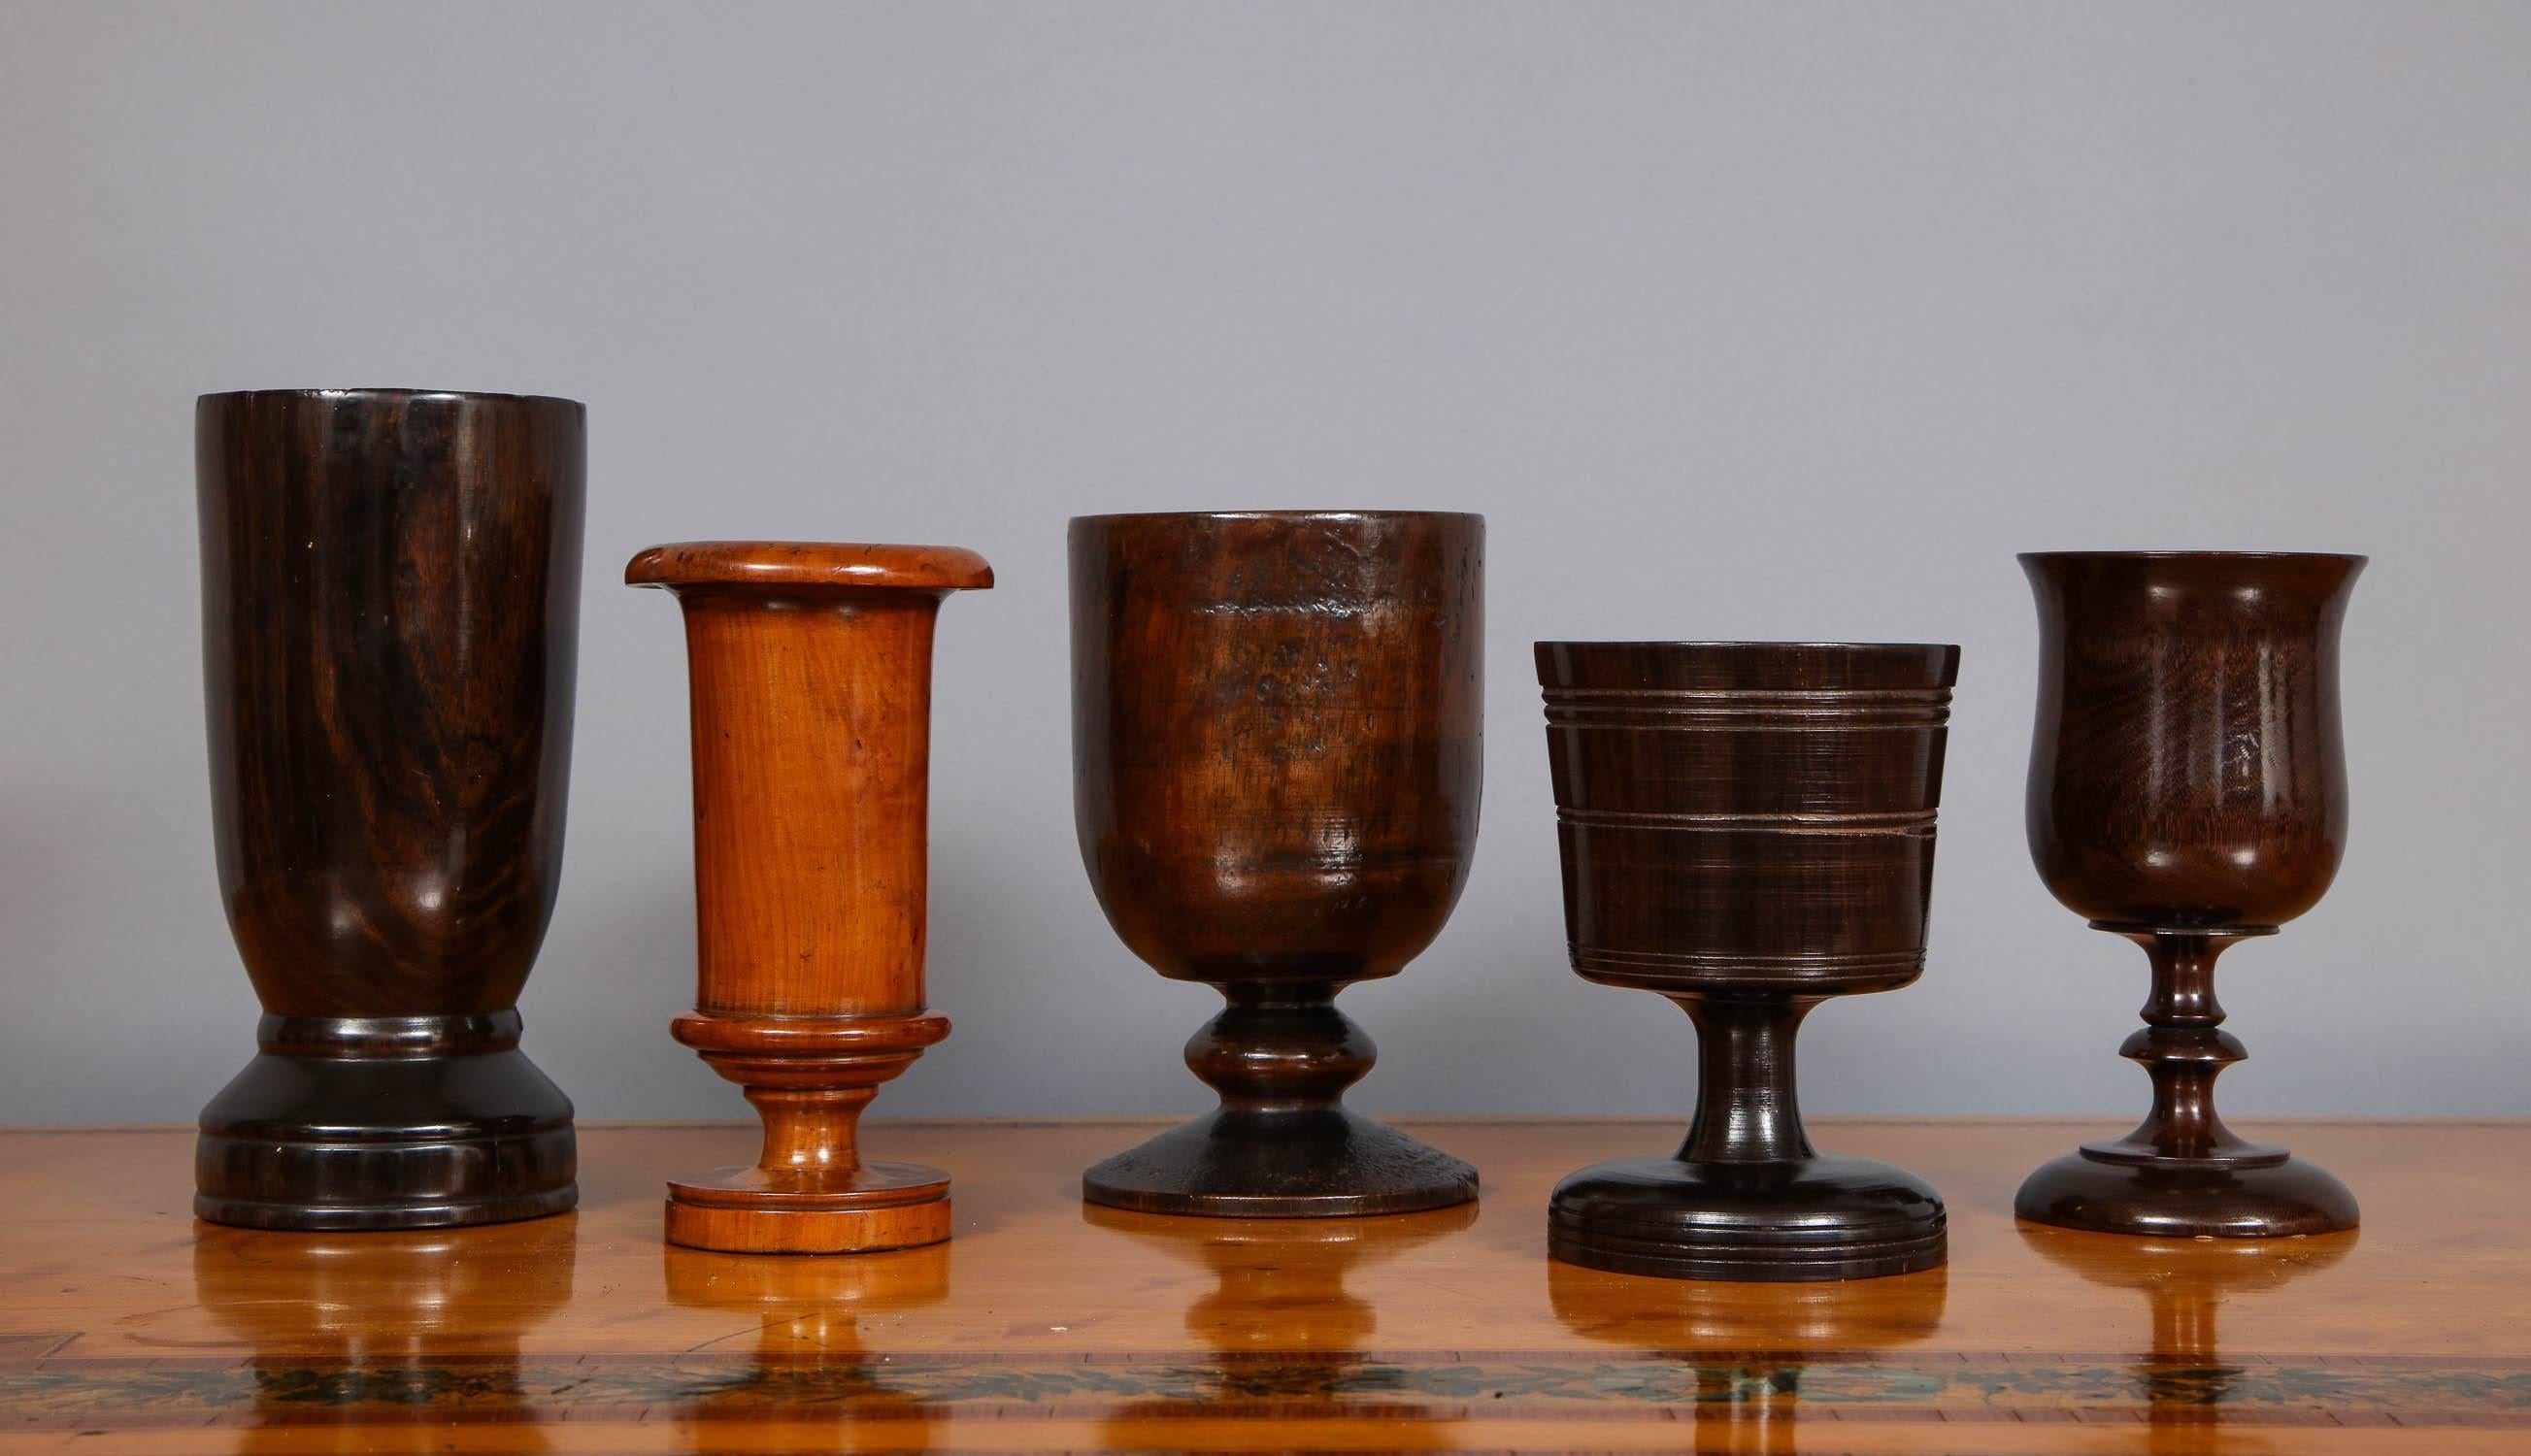 Fine assortment of English 18th and 19th century turned wooden vessels comprising, from left to right, an 18th century turned Lignum Vitae vase ($750), a fine early 19th century turned pearwood spill vase, ex collection of A. J. Levi ($1,650), an